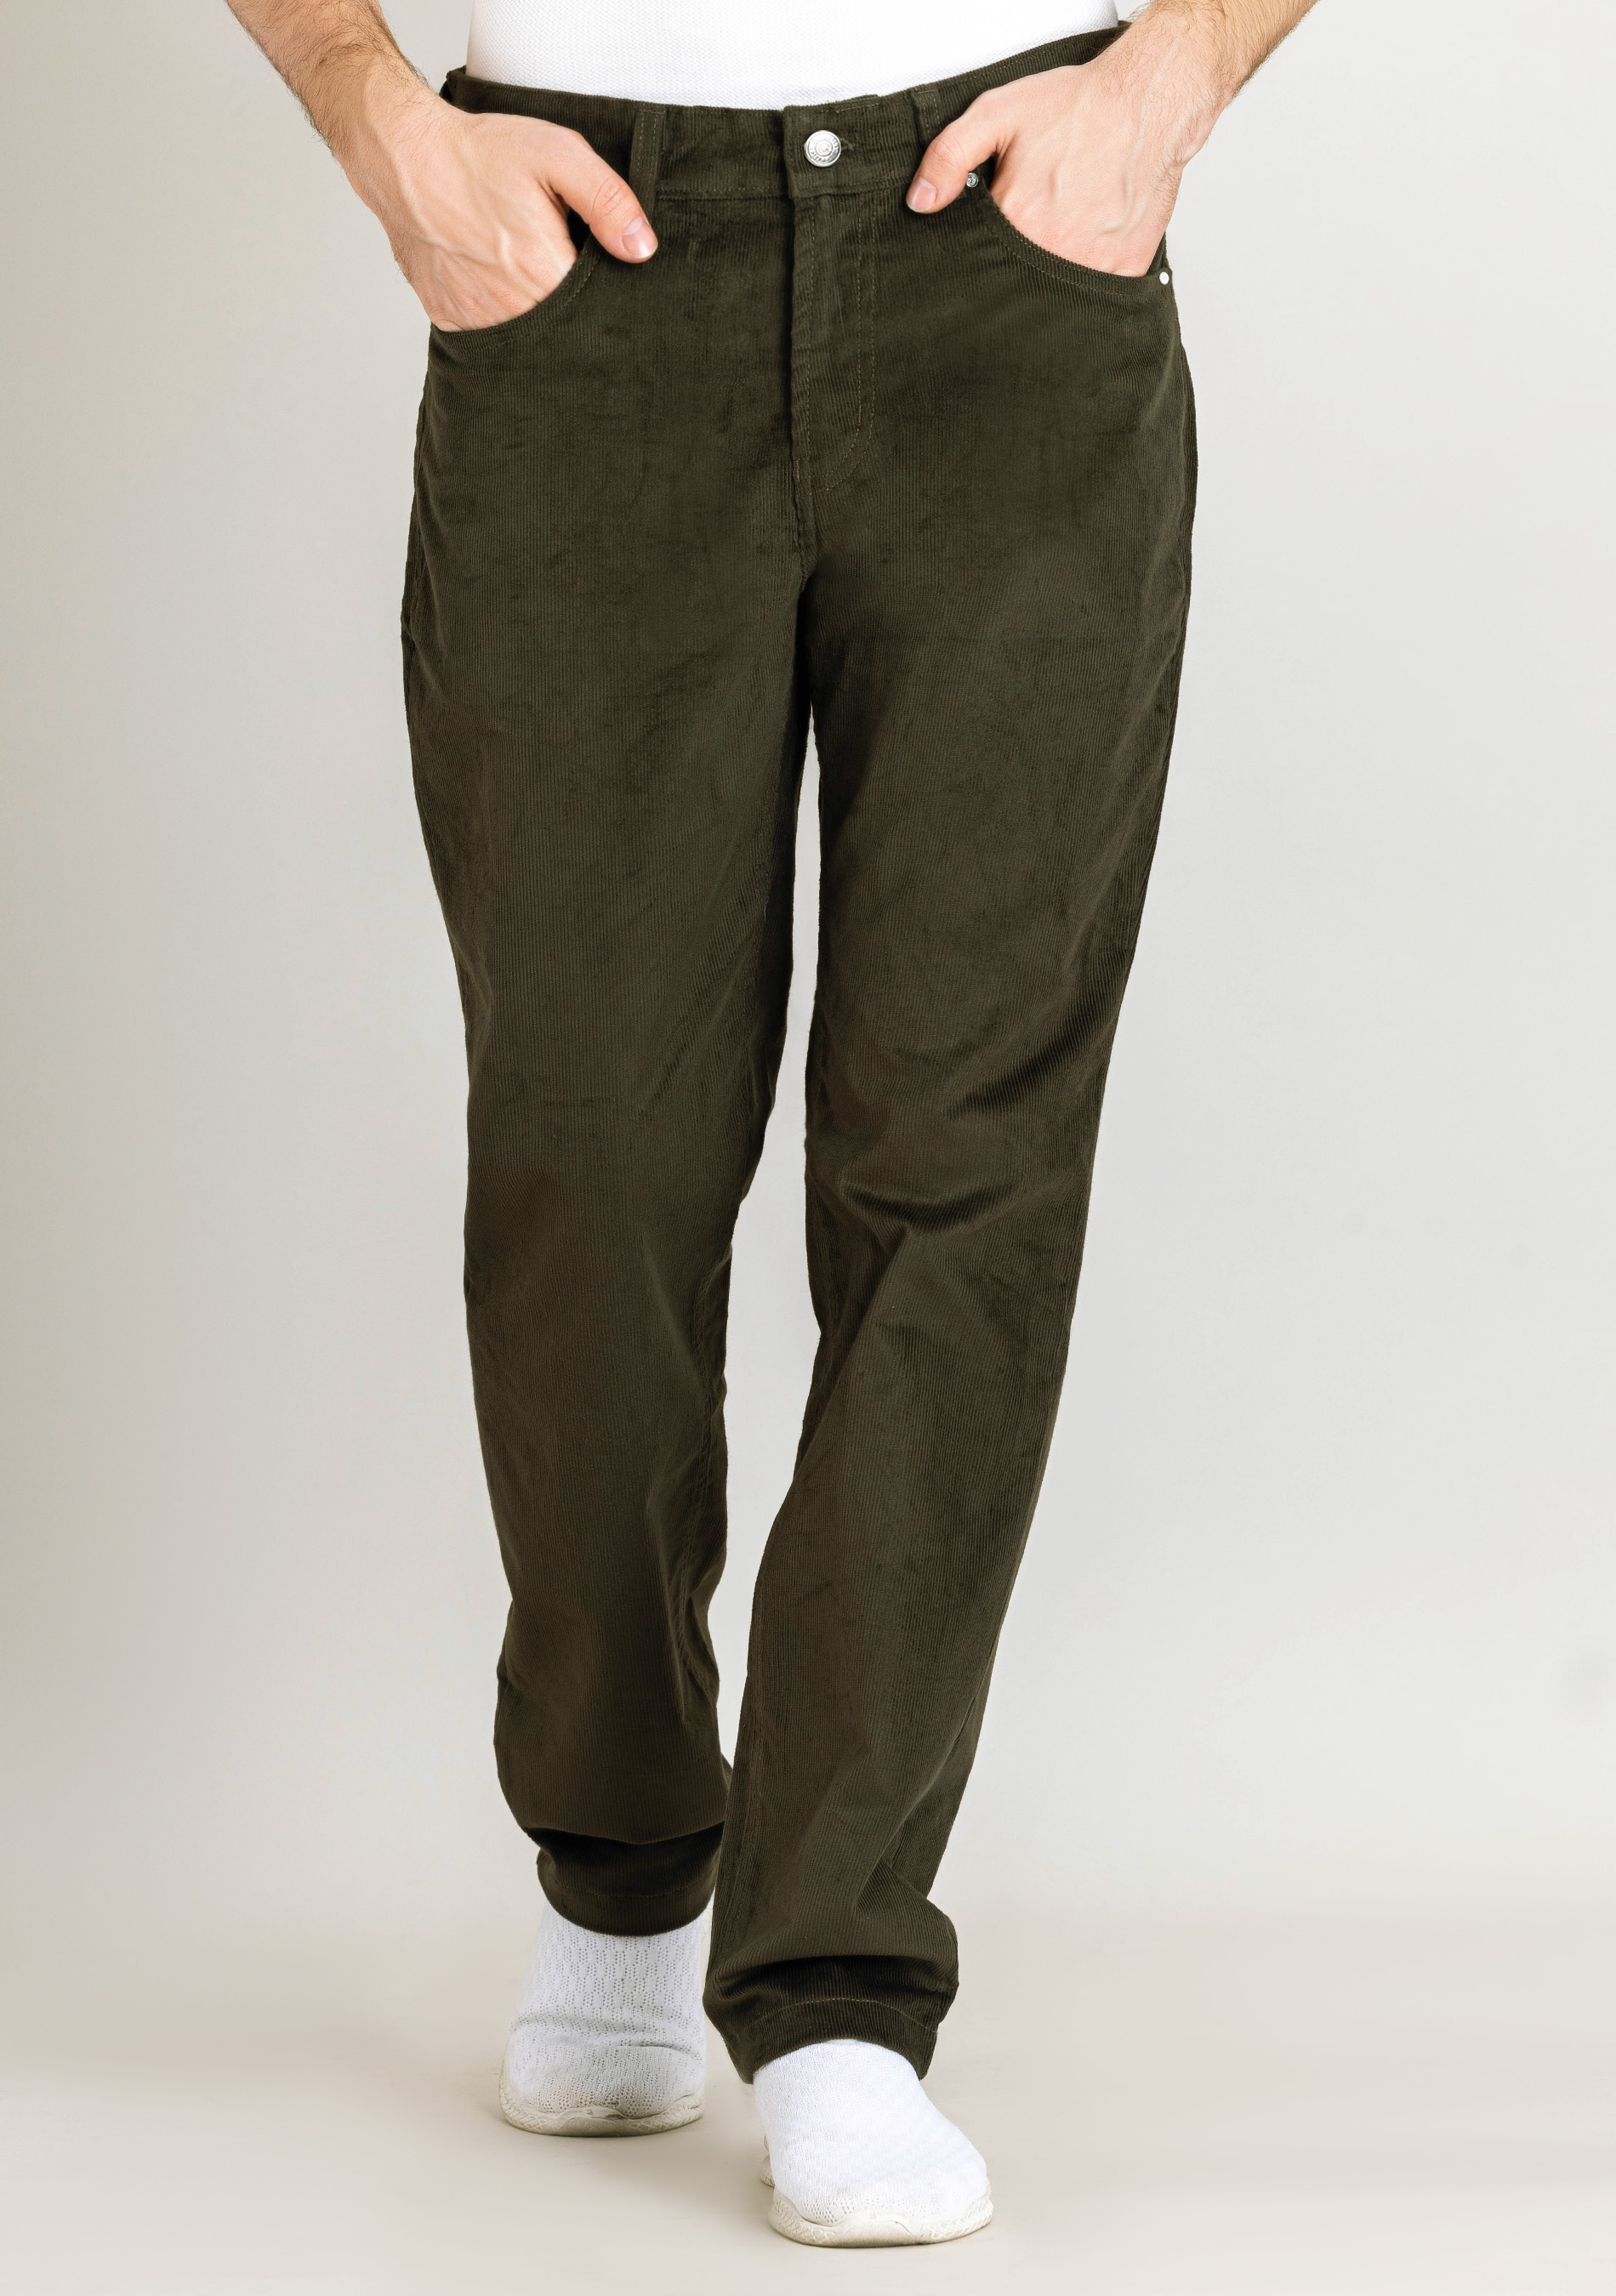 Olive Regular Fit Men’s Casual Corduroy Trousers - Buy Online in India ...